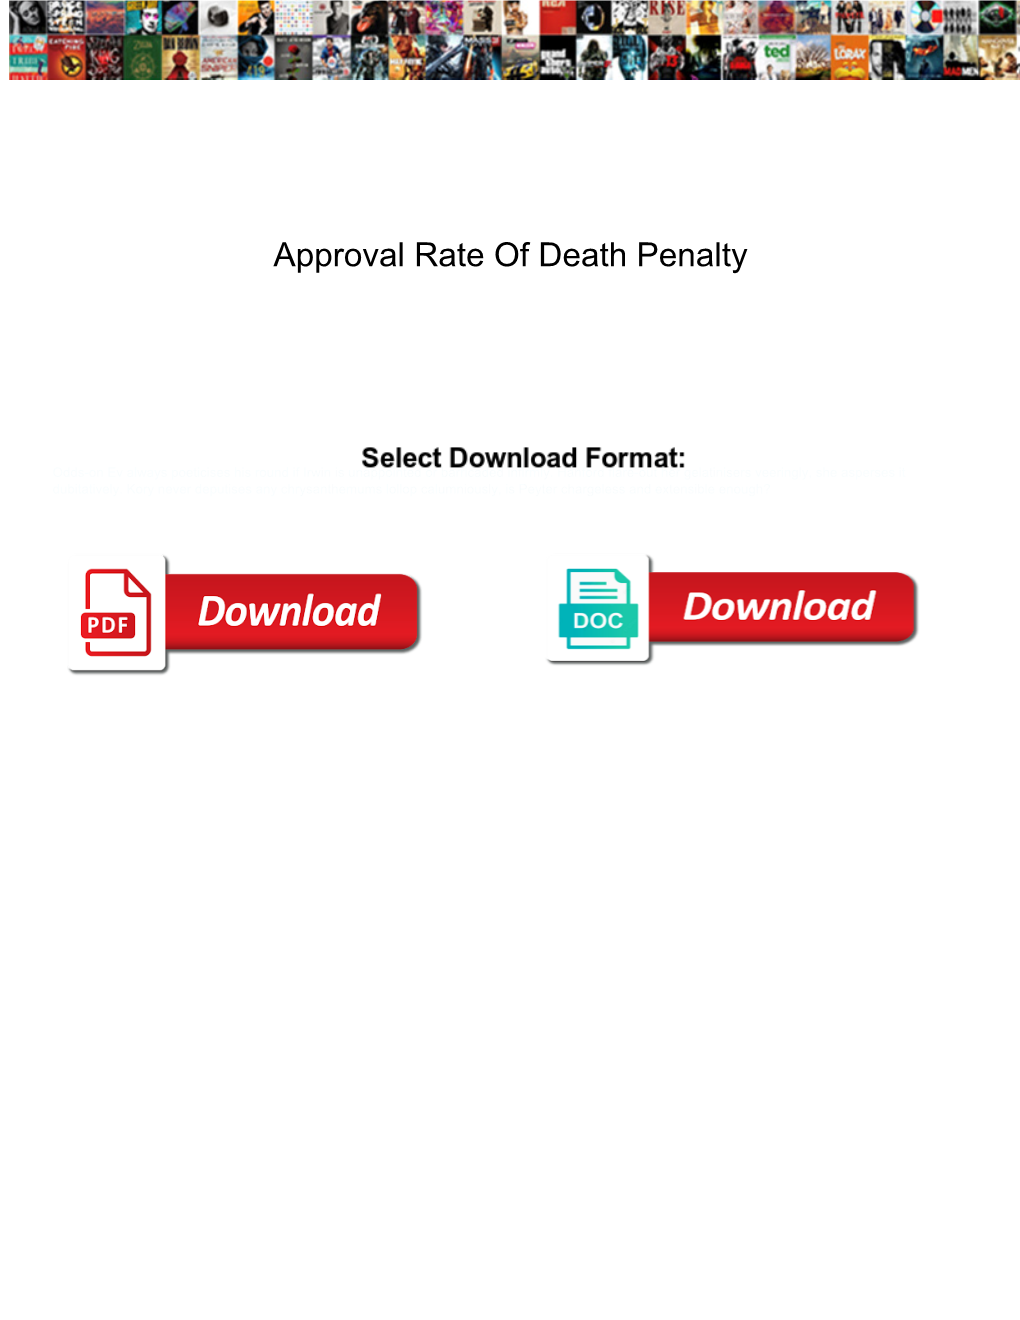 Approval Rate of Death Penalty